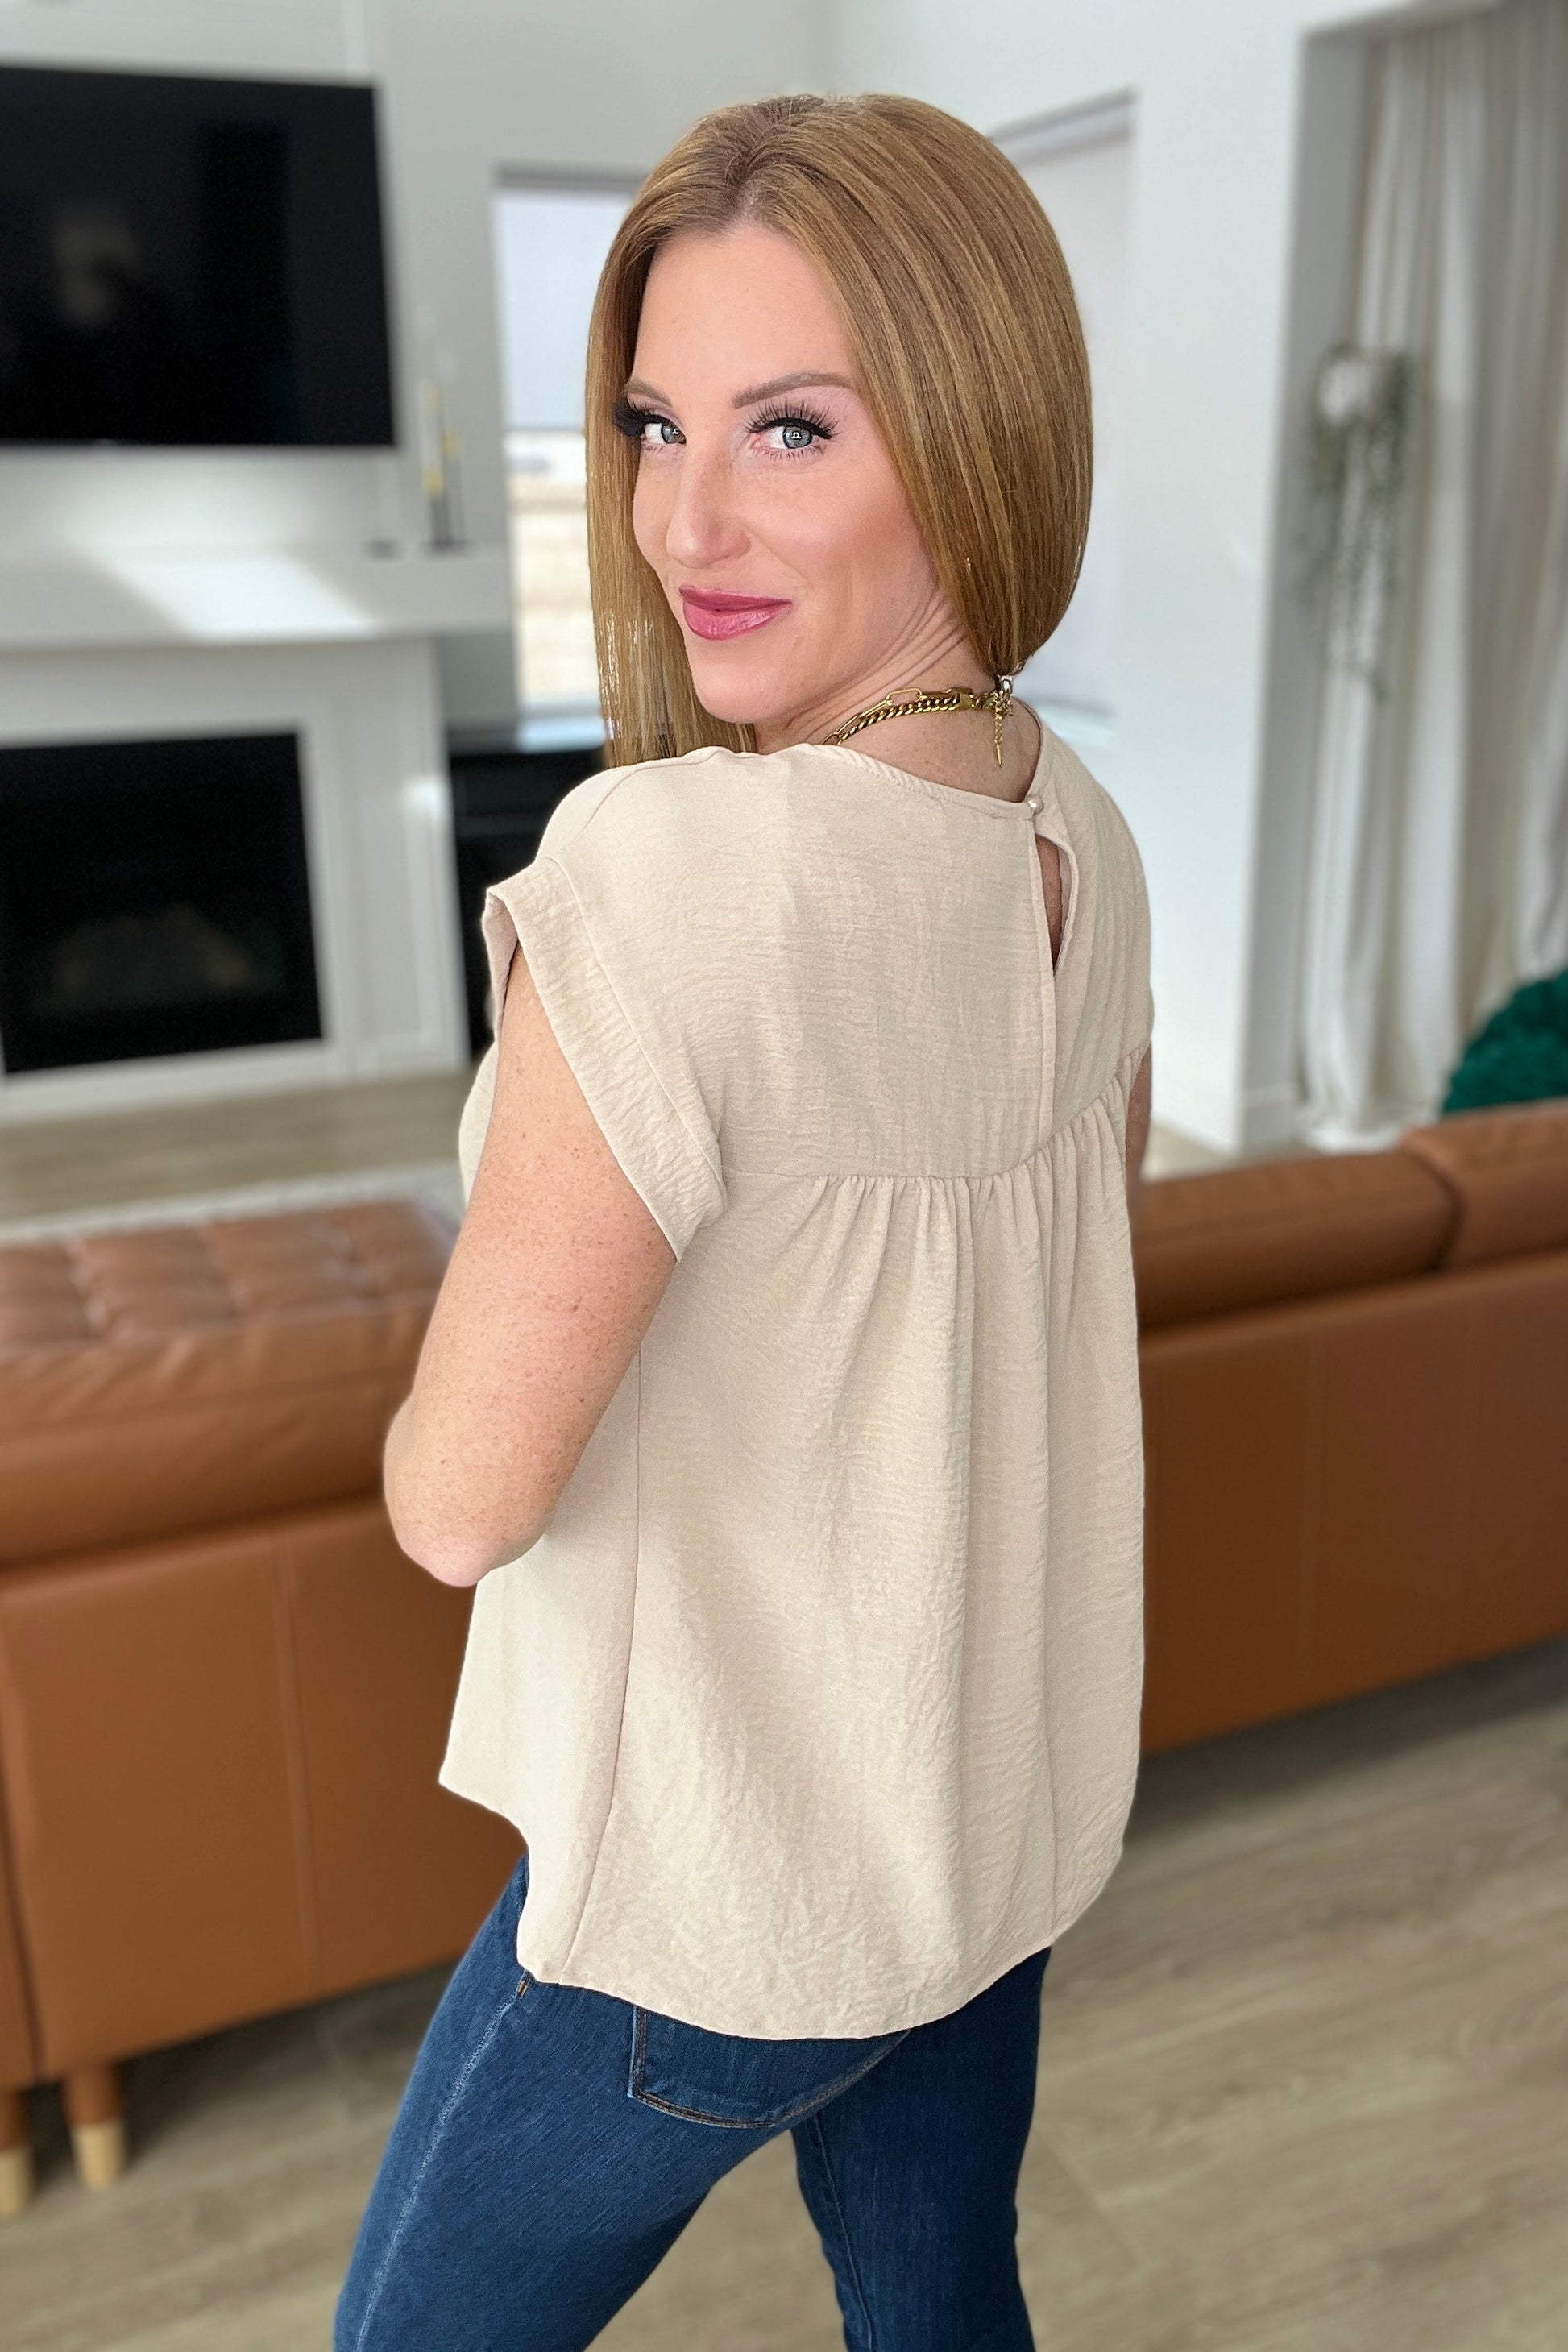 Airflow Babydoll Top in Taupe - Tops